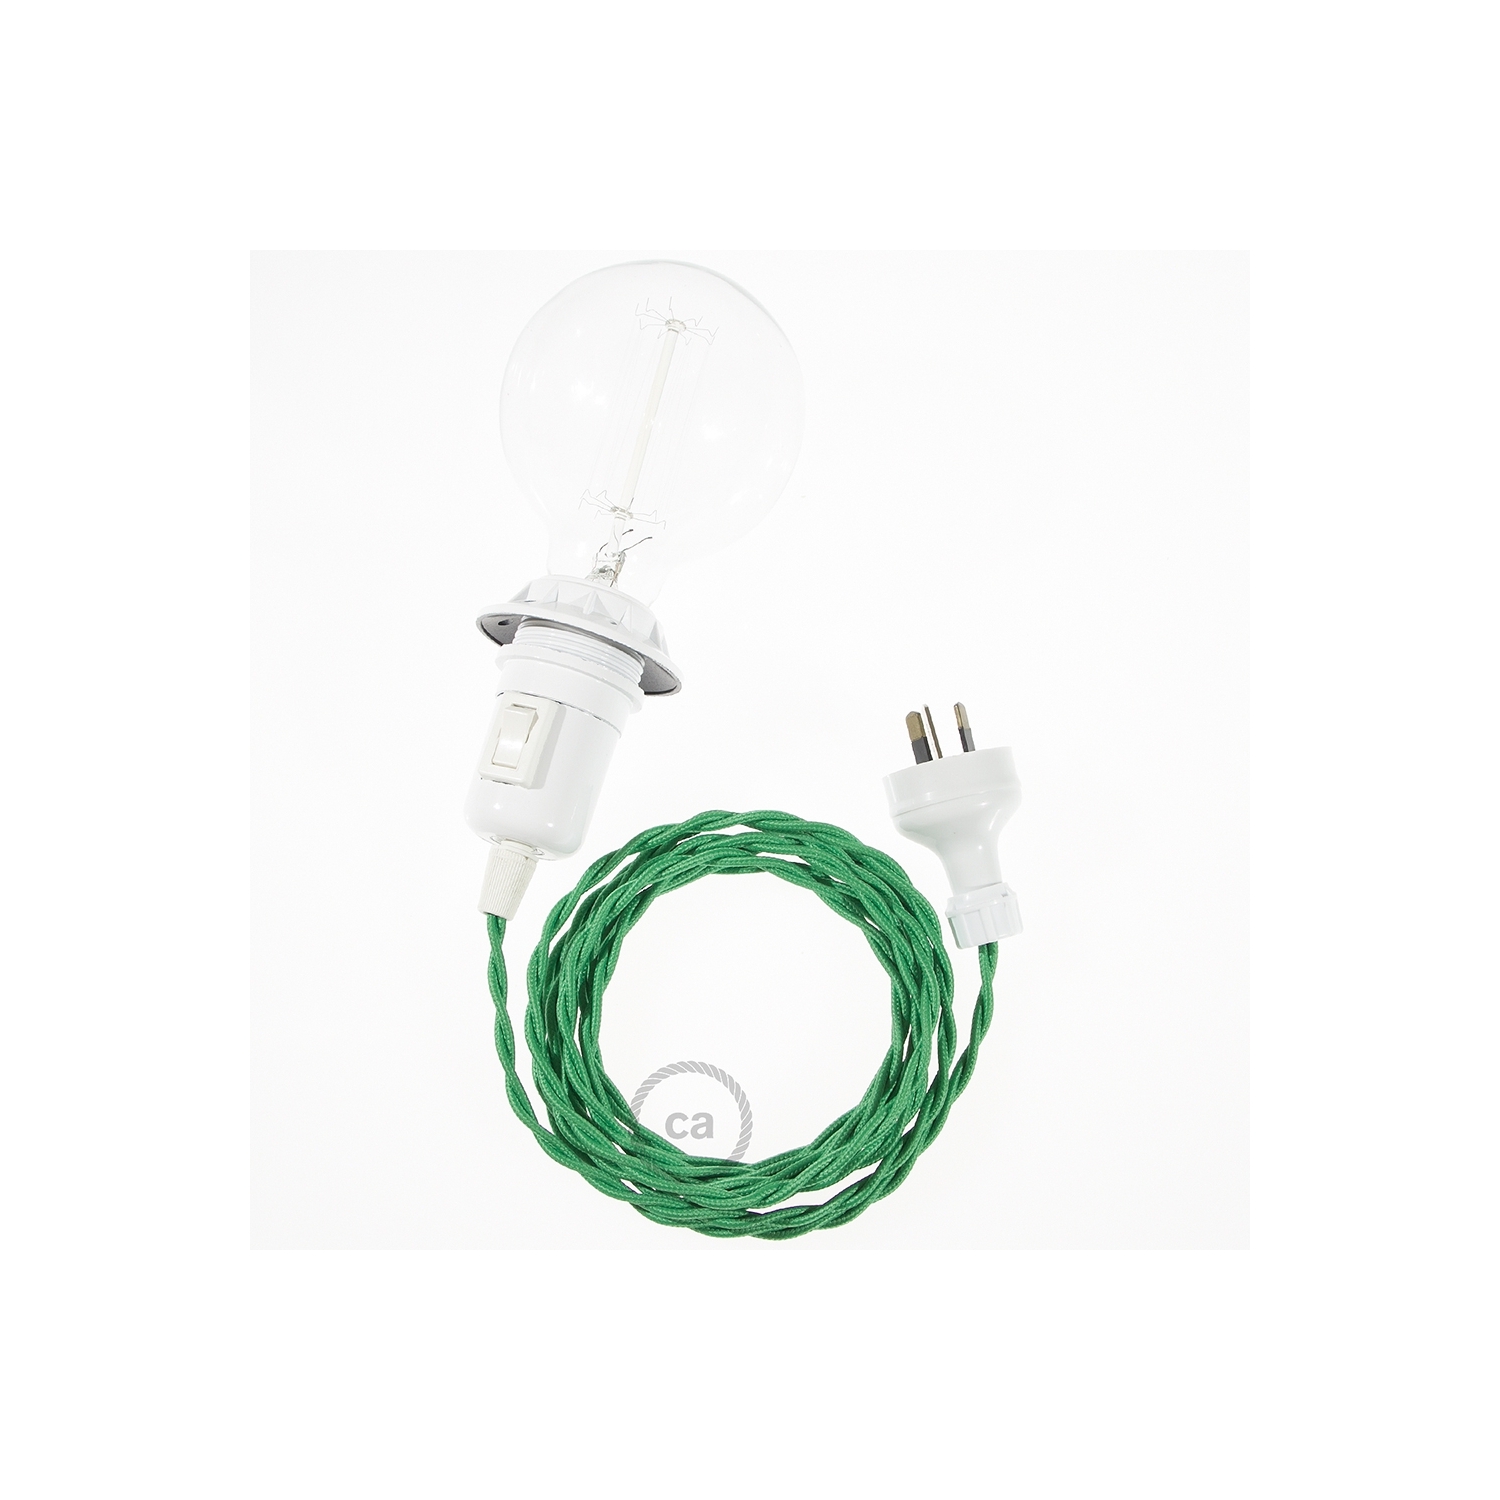 Create your TM06 Green Rayon Snake for lampshade and bring the light wherever you want.